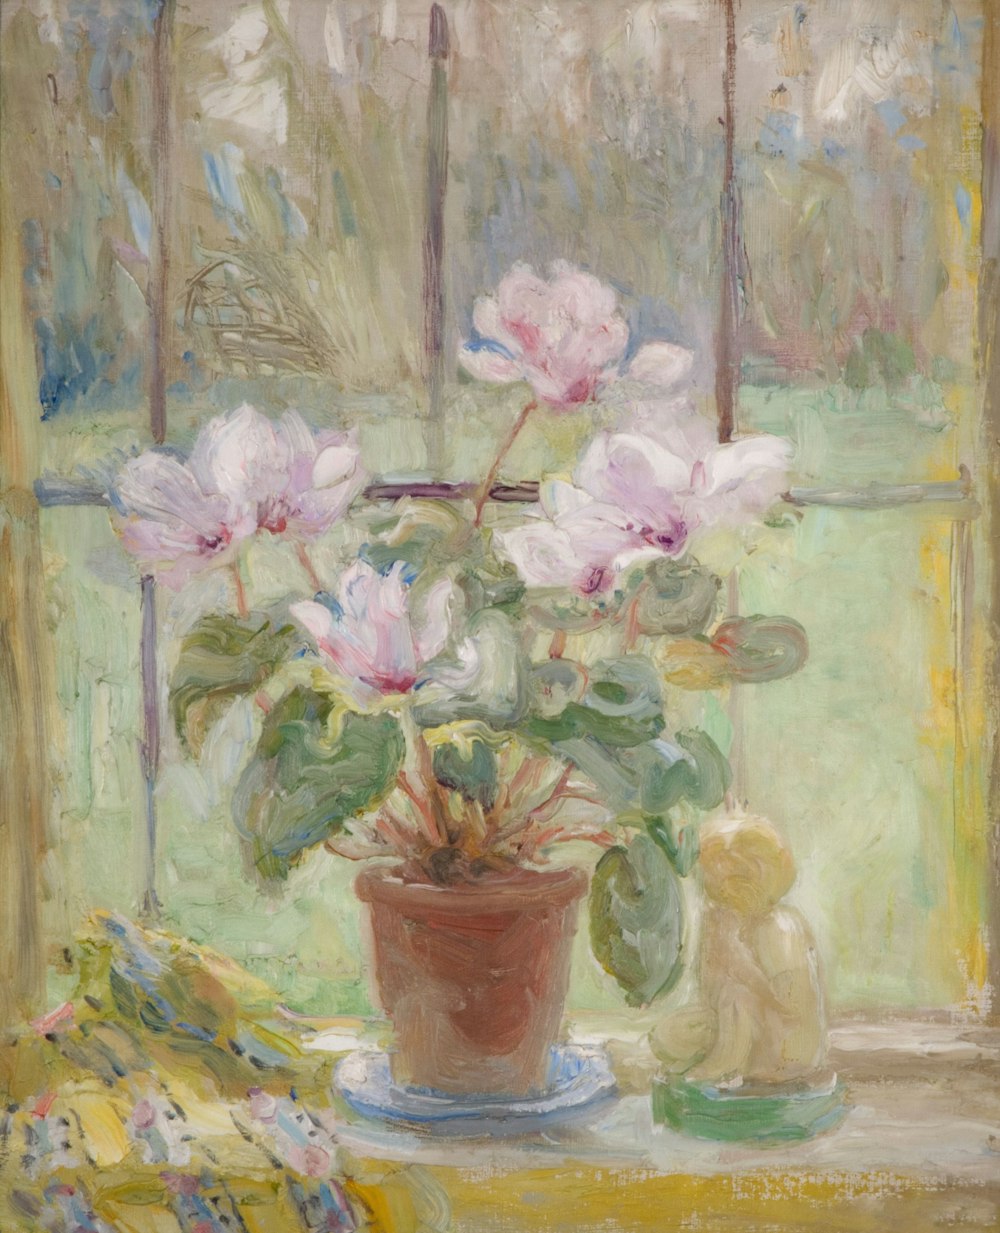 a painting of a potted plant on a window sill